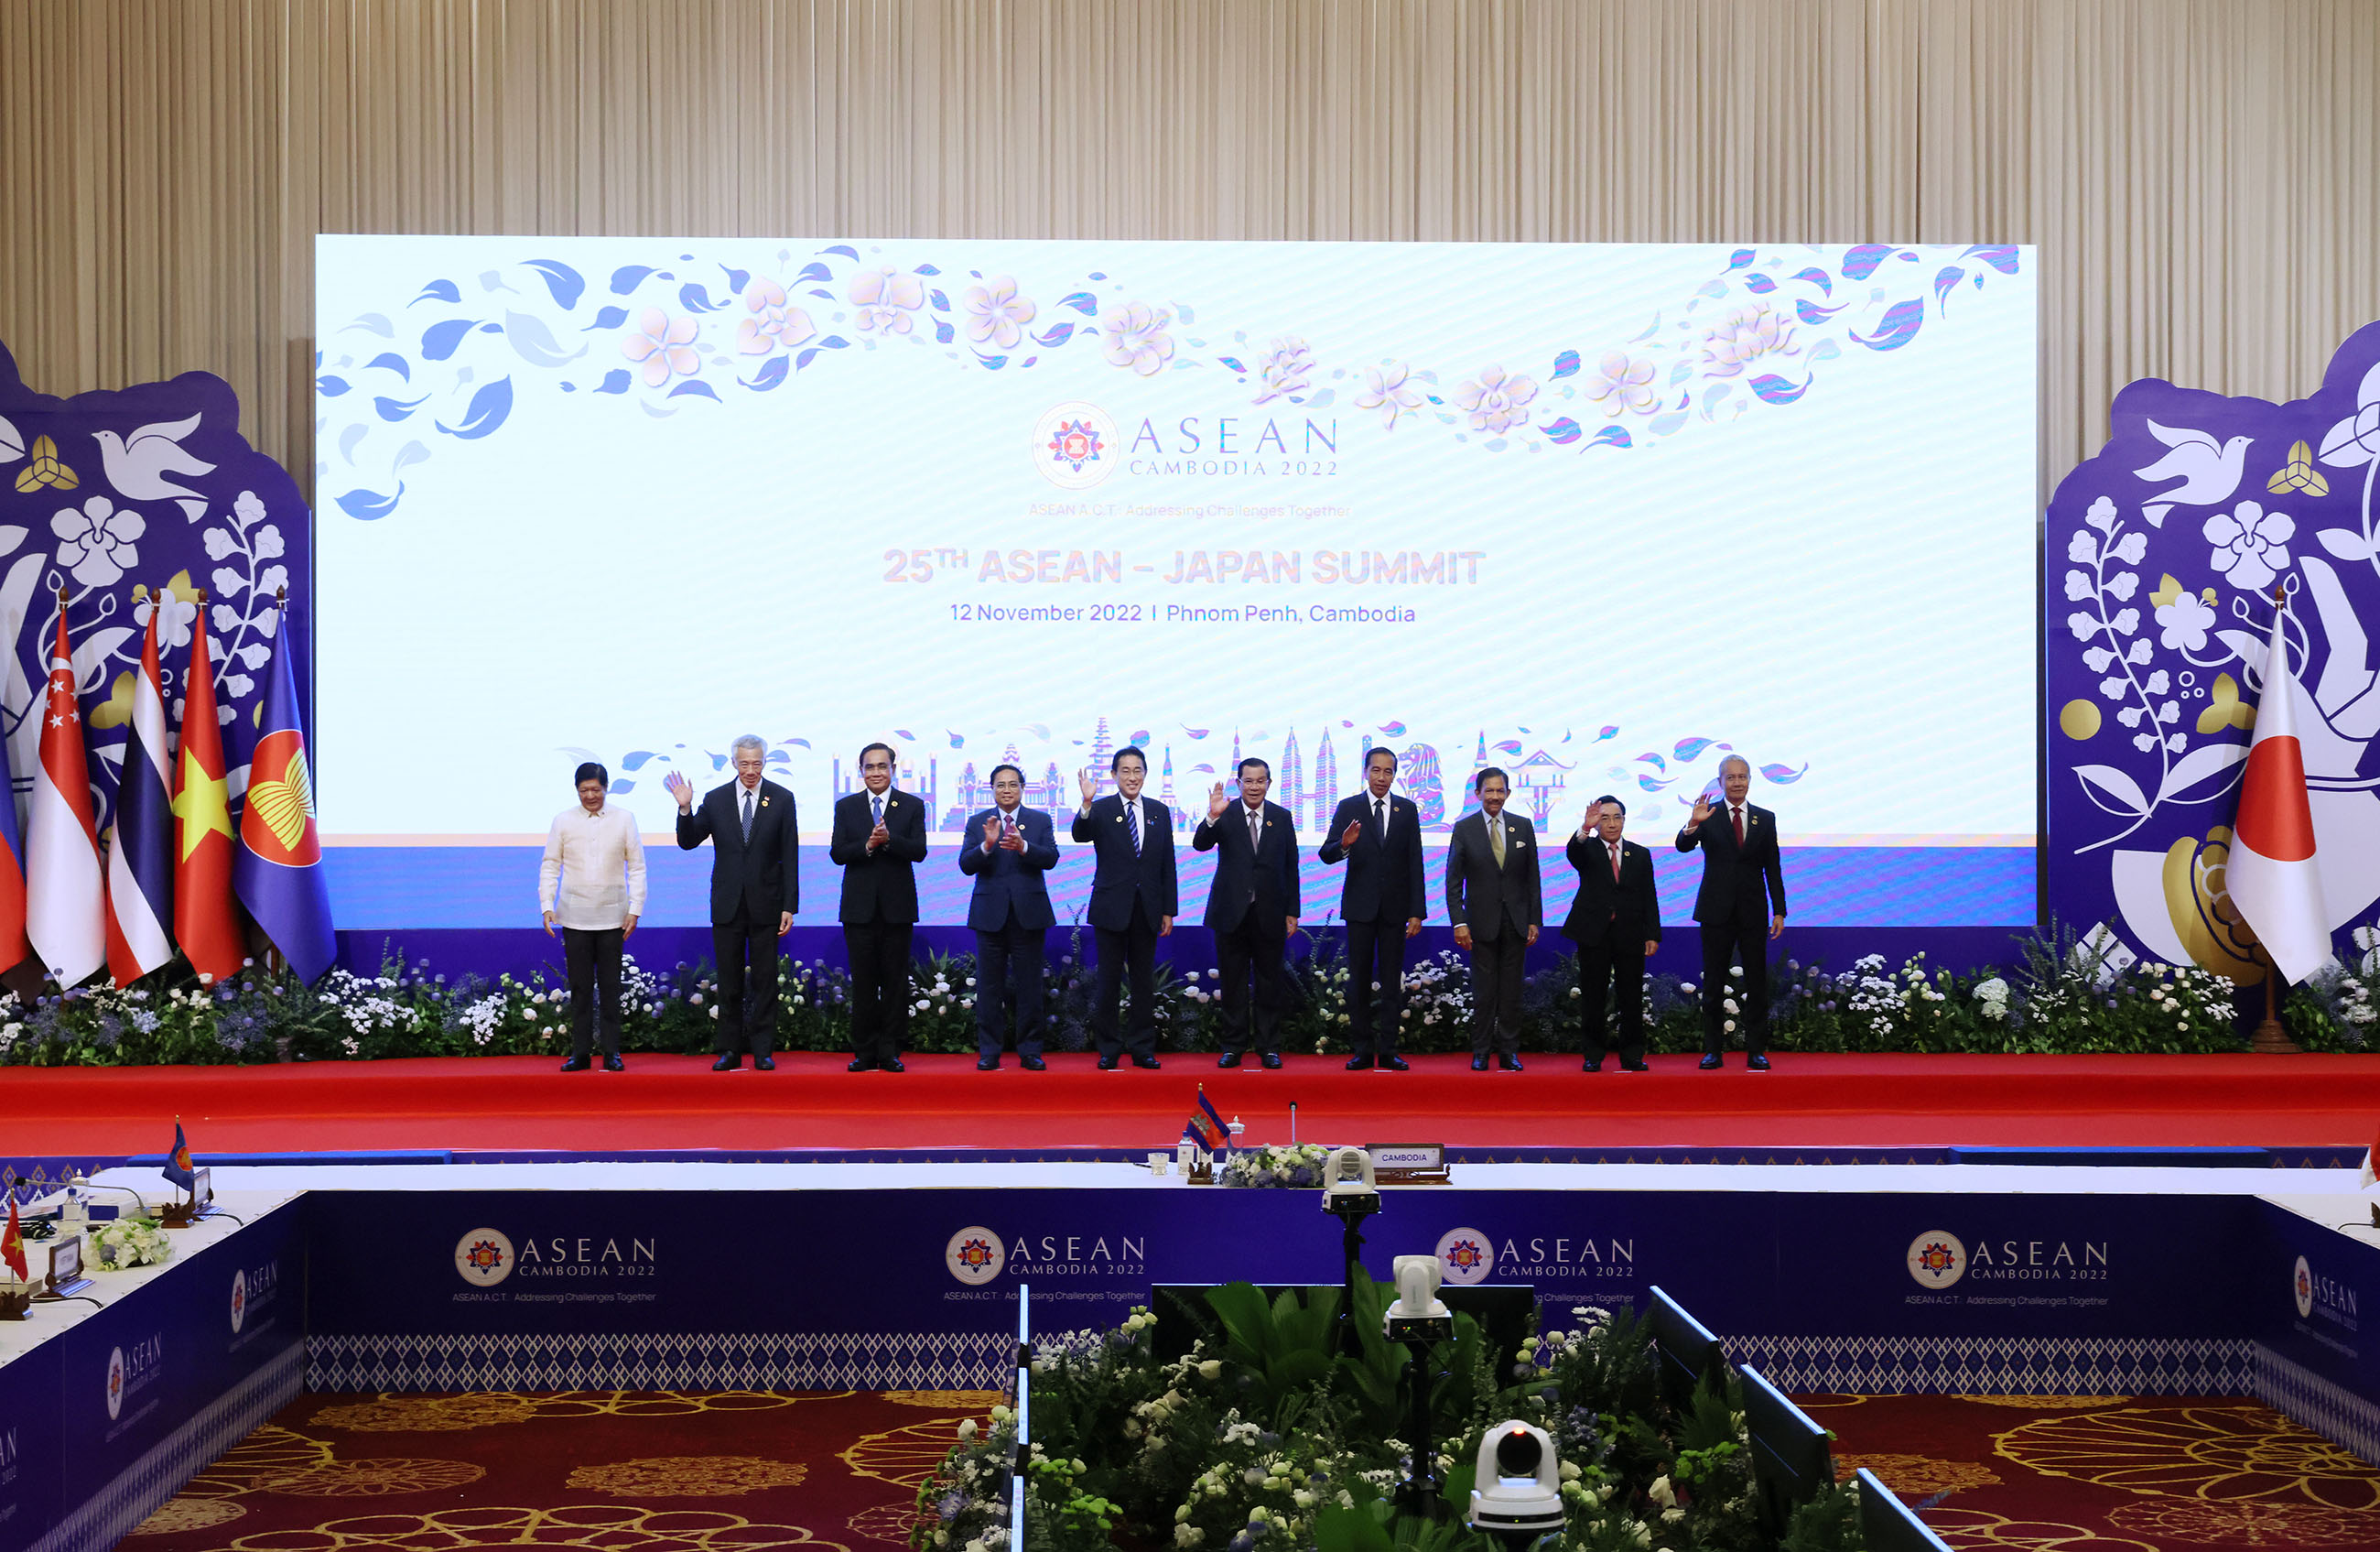 Photograph of the Prime Minister at a photograph session with ASEAN leaders (1)